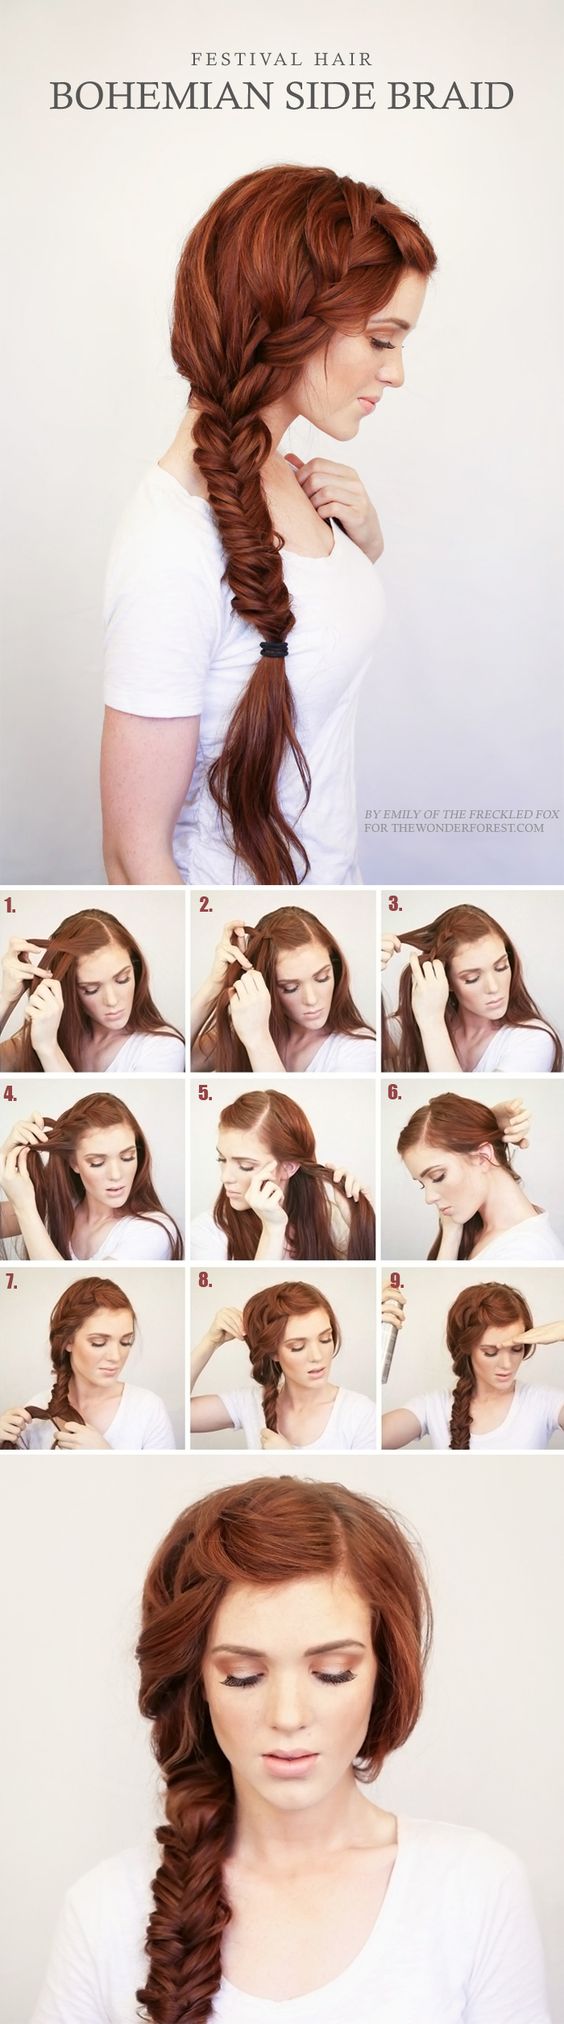 10 Quick and Easy Hairstyles Stepbystep  Newswire Talk